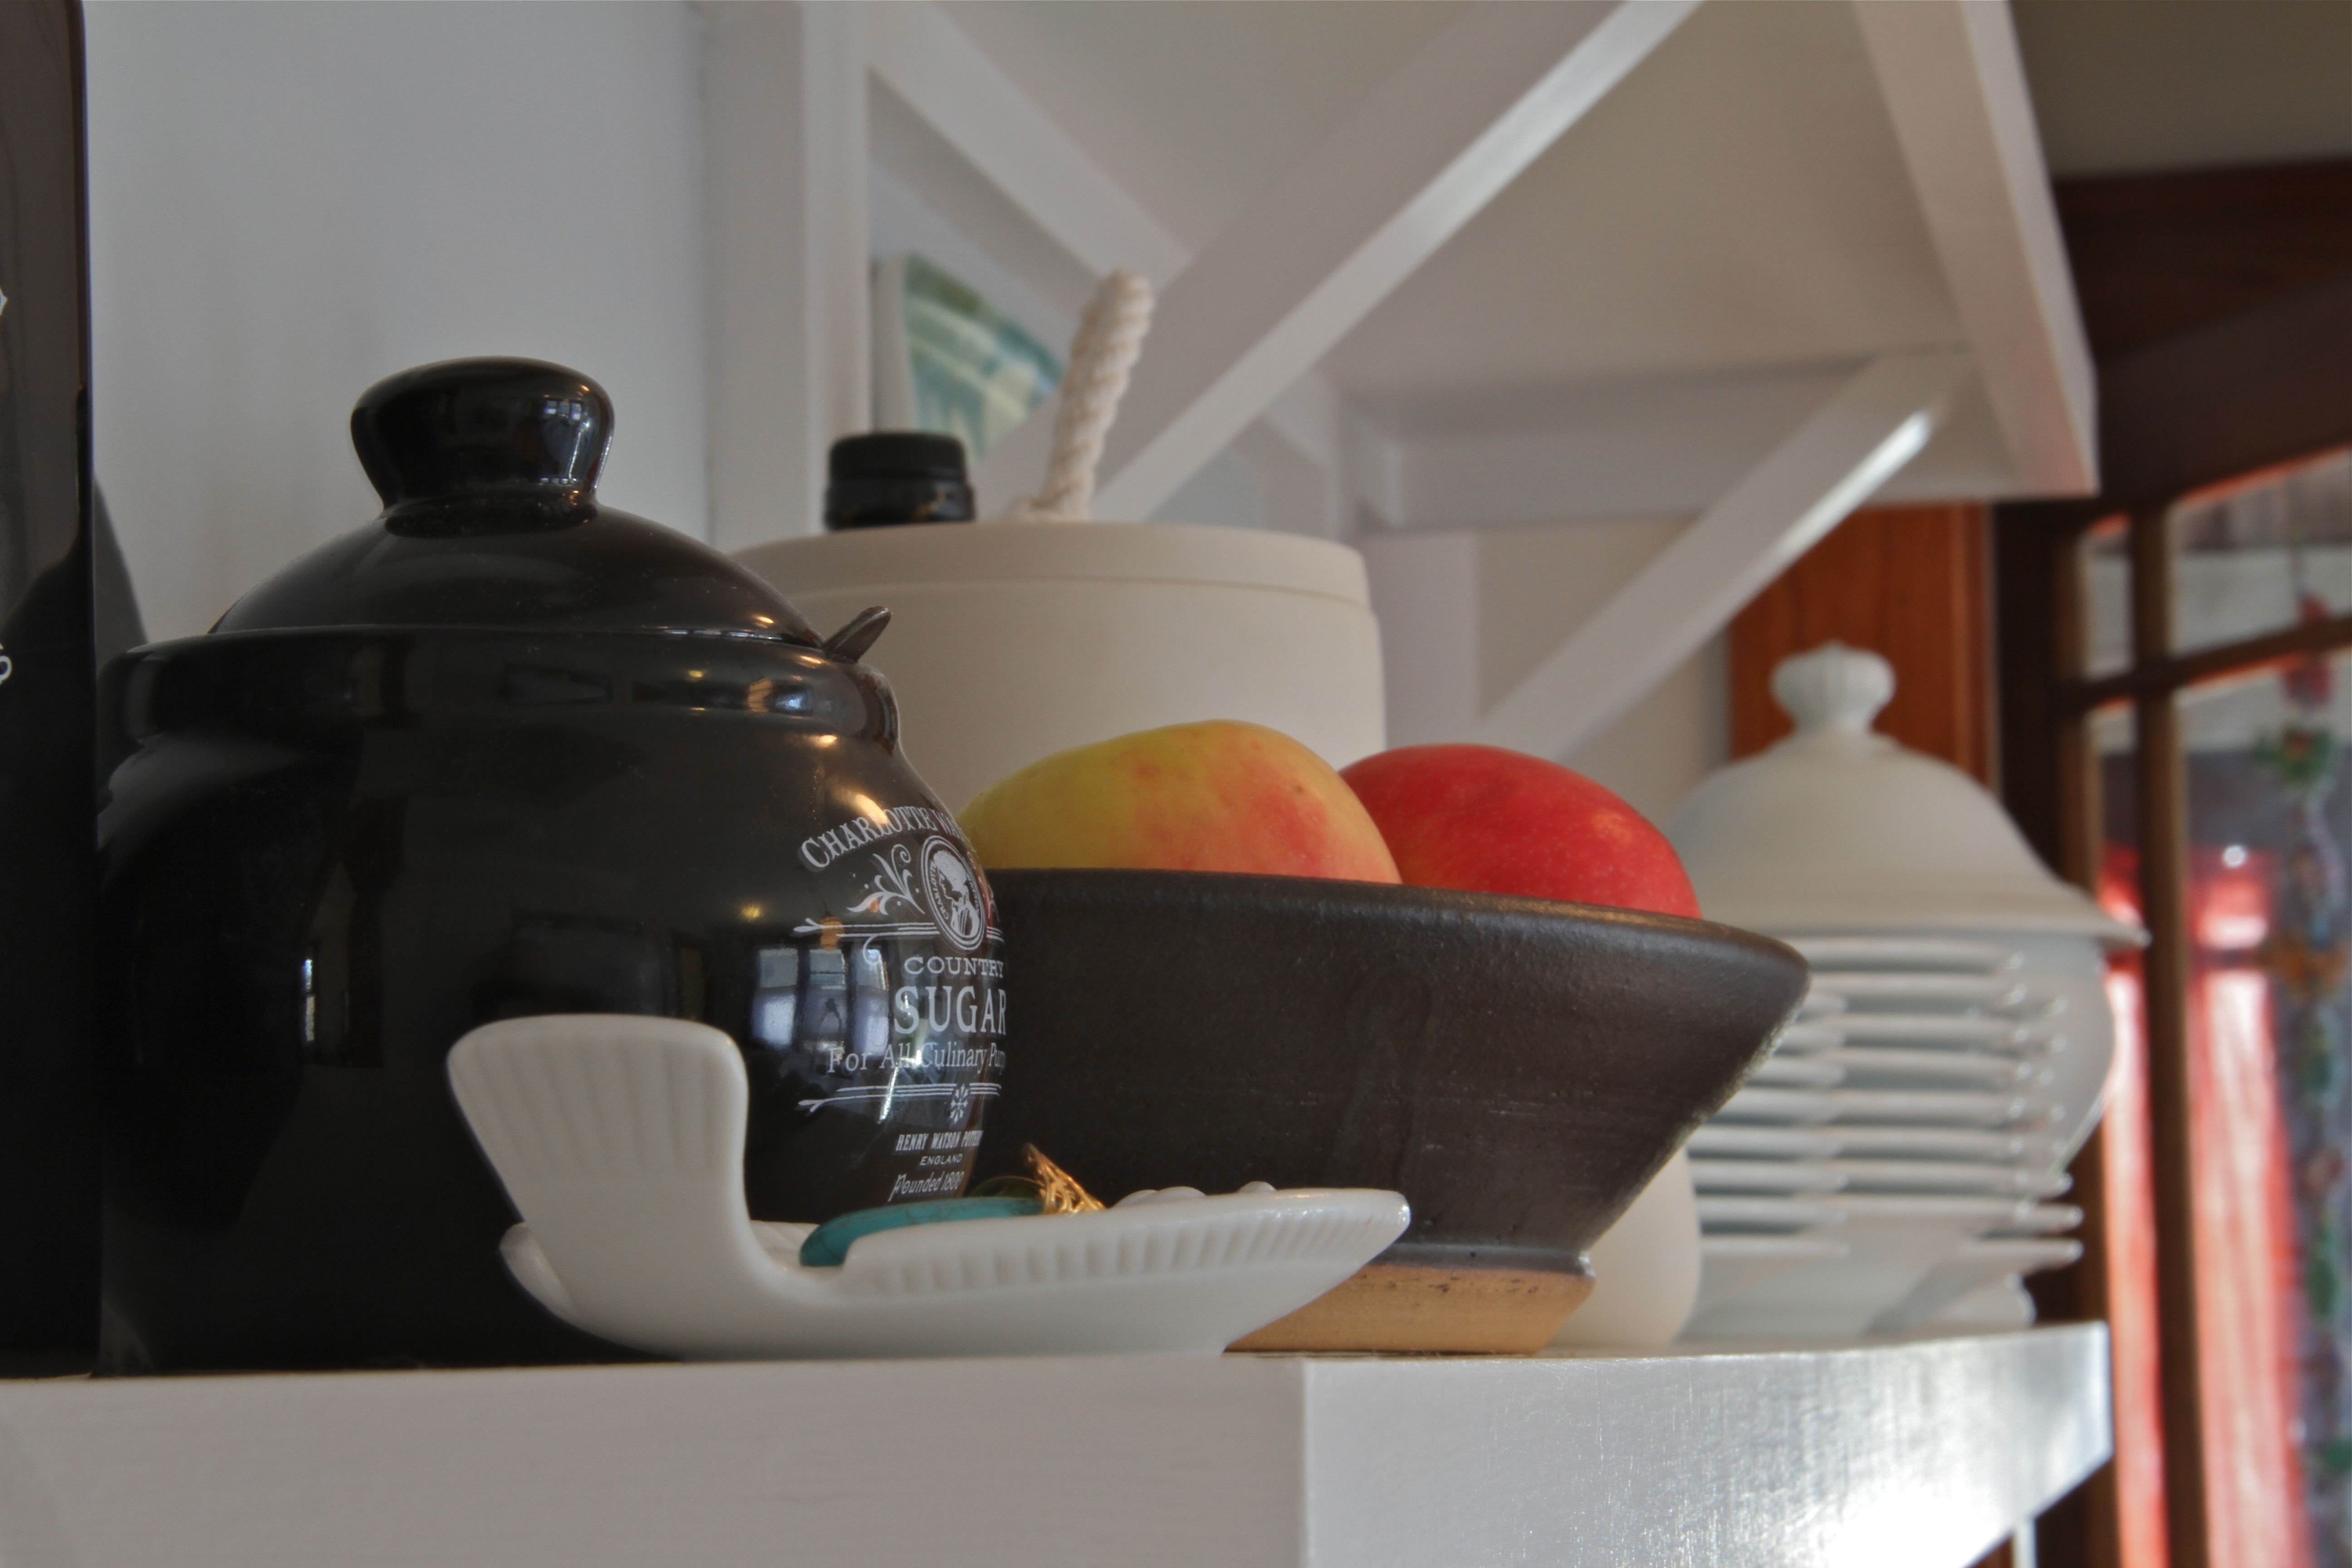 AFTER: Beauty shot - open shelves with lovely display of keepsakes and useful day-to-day kitchenware.